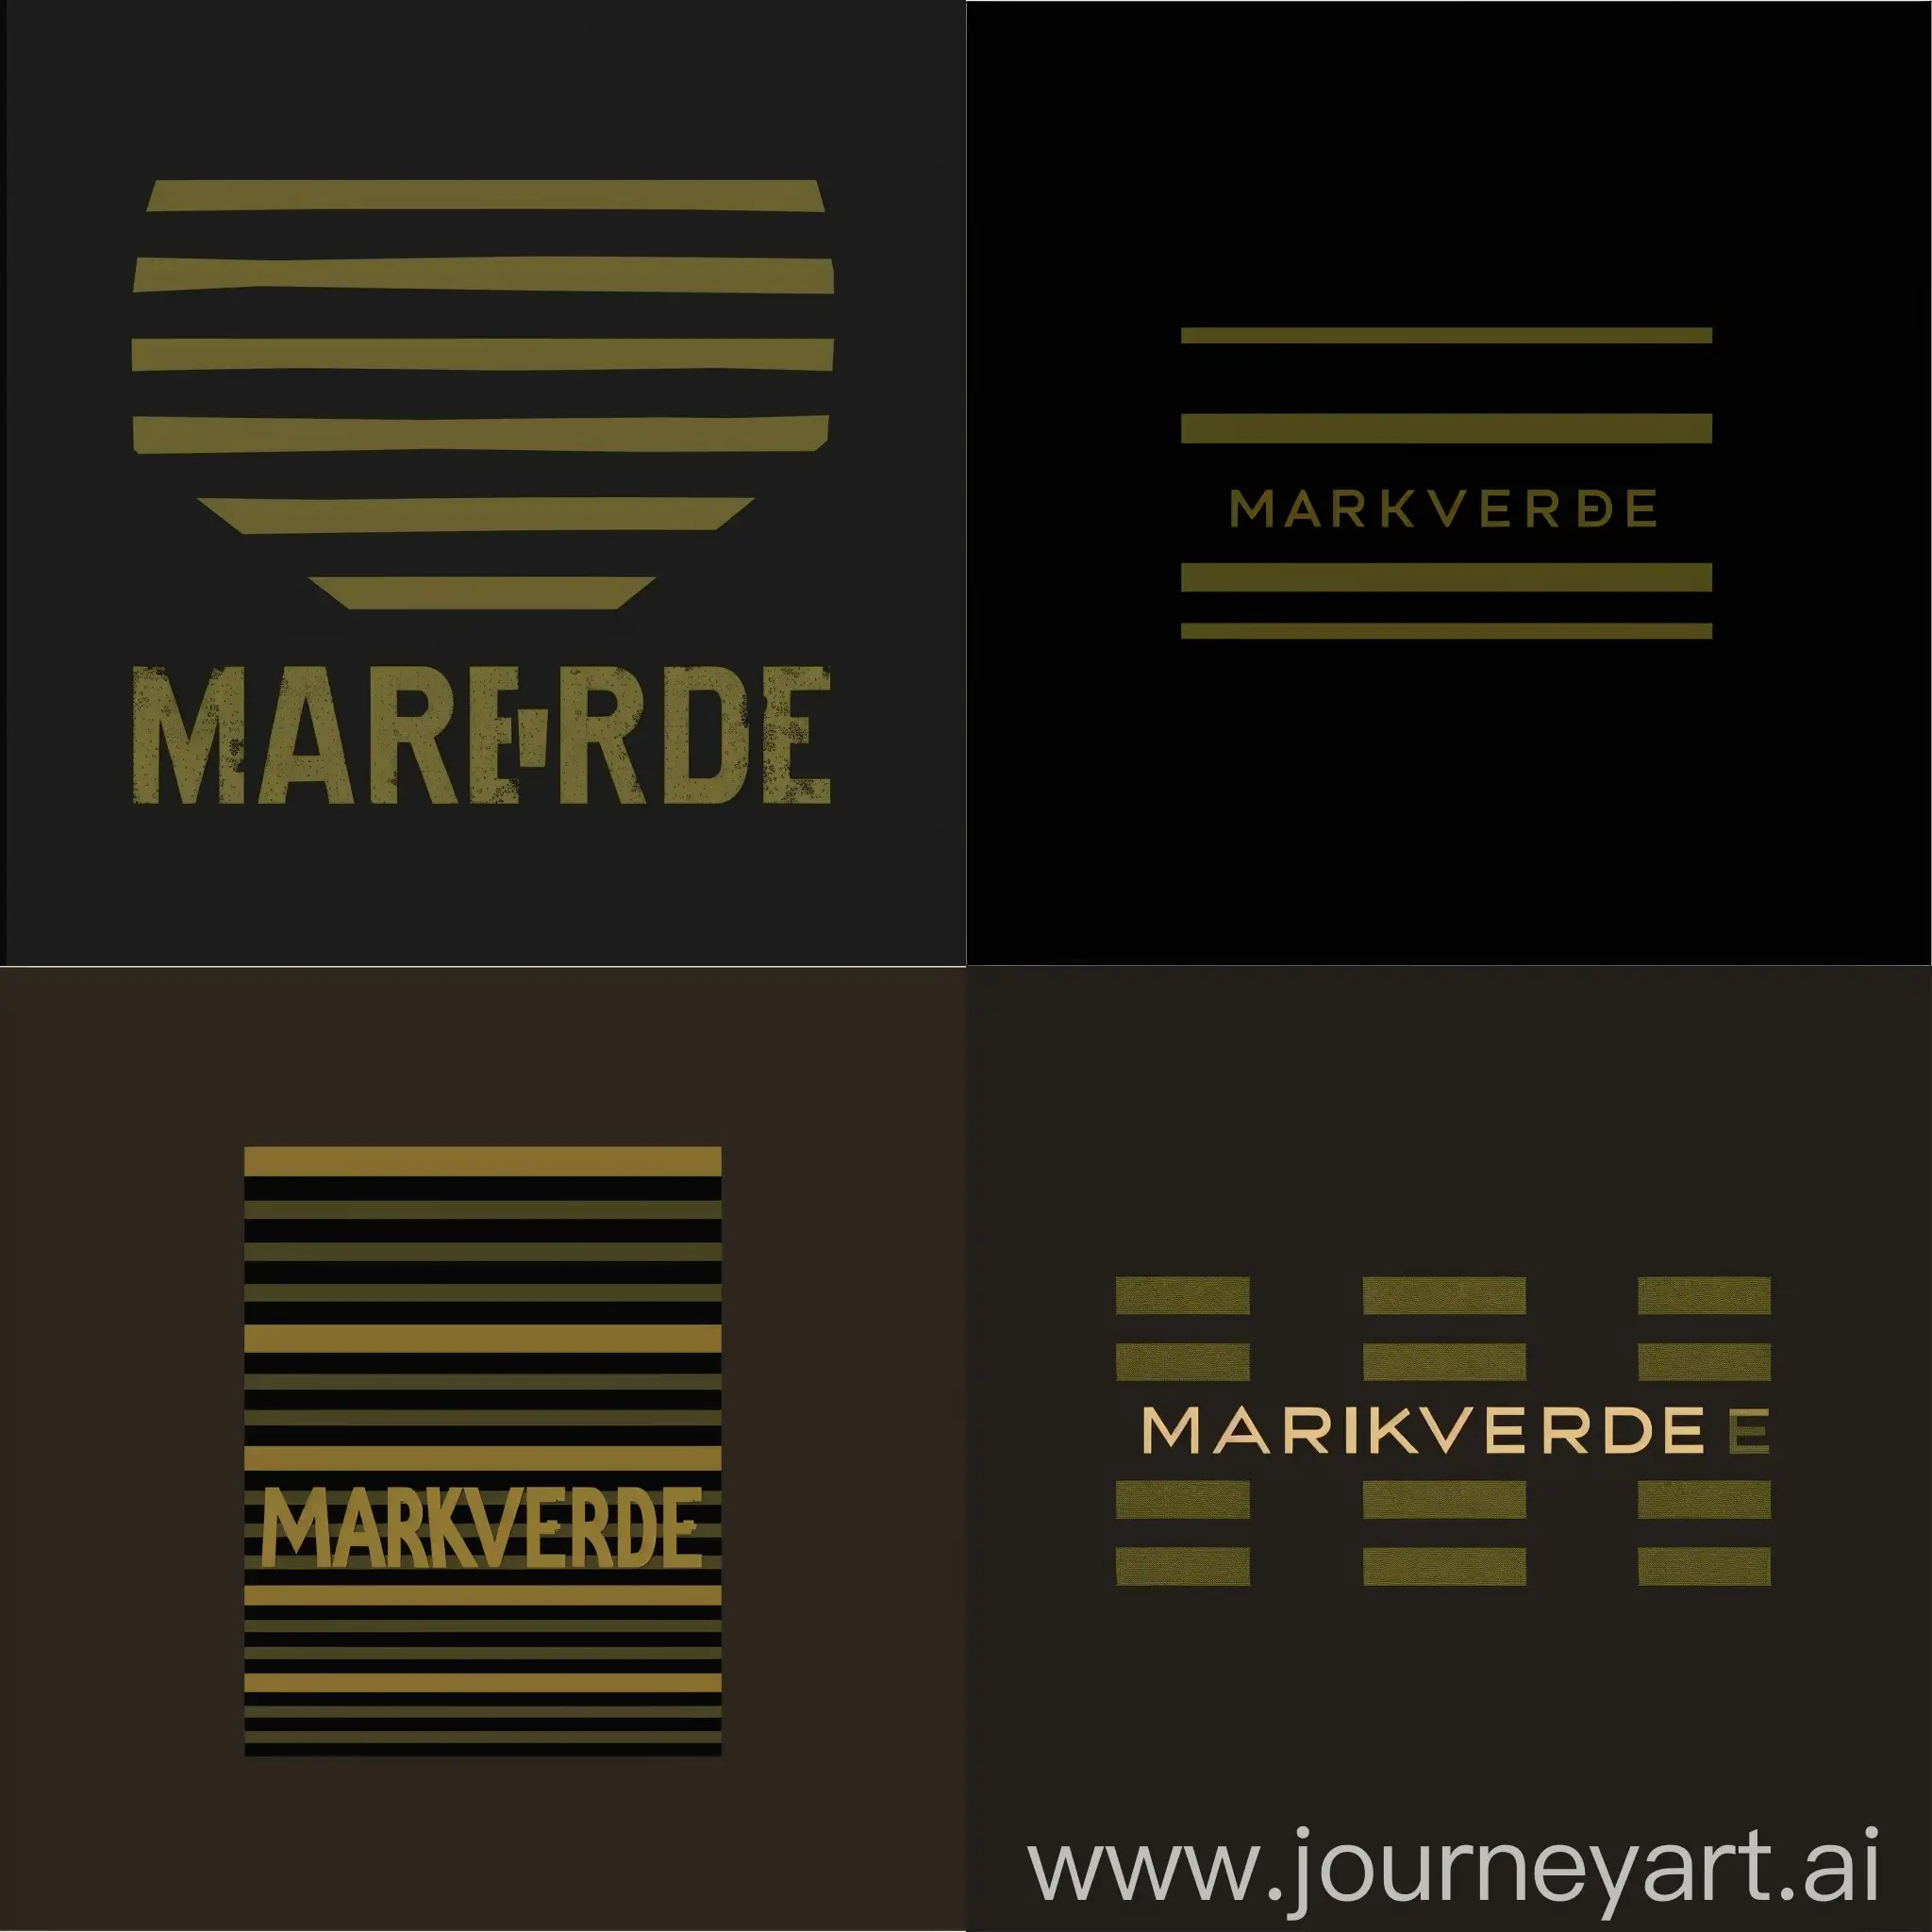 Create a logo with the text marchverde, the logo should be made in the style of special forces stripes. The color of the logo should be black and olive